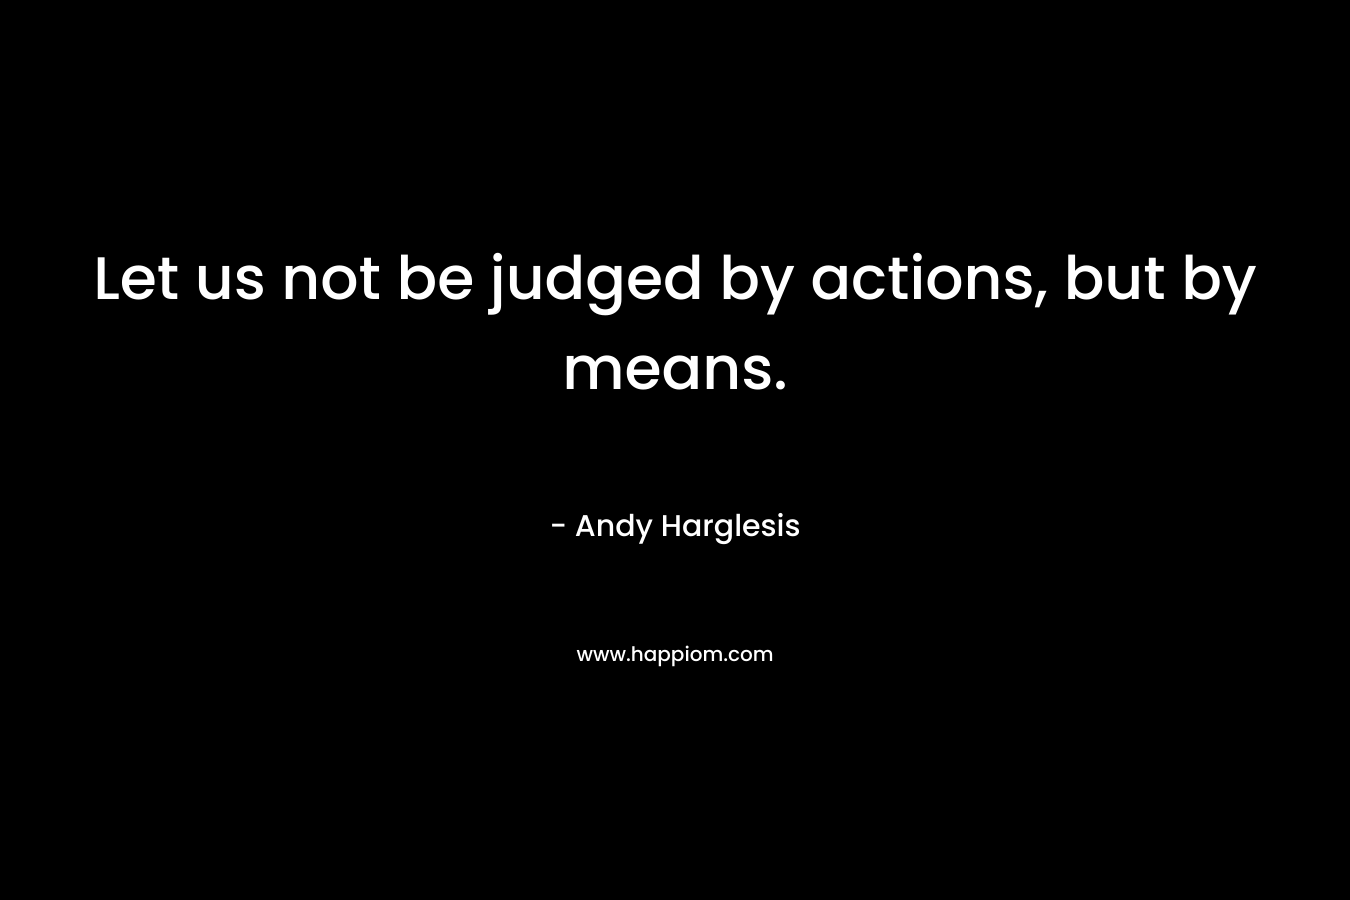 Let us not be judged by actions, but by means. – Andy Harglesis